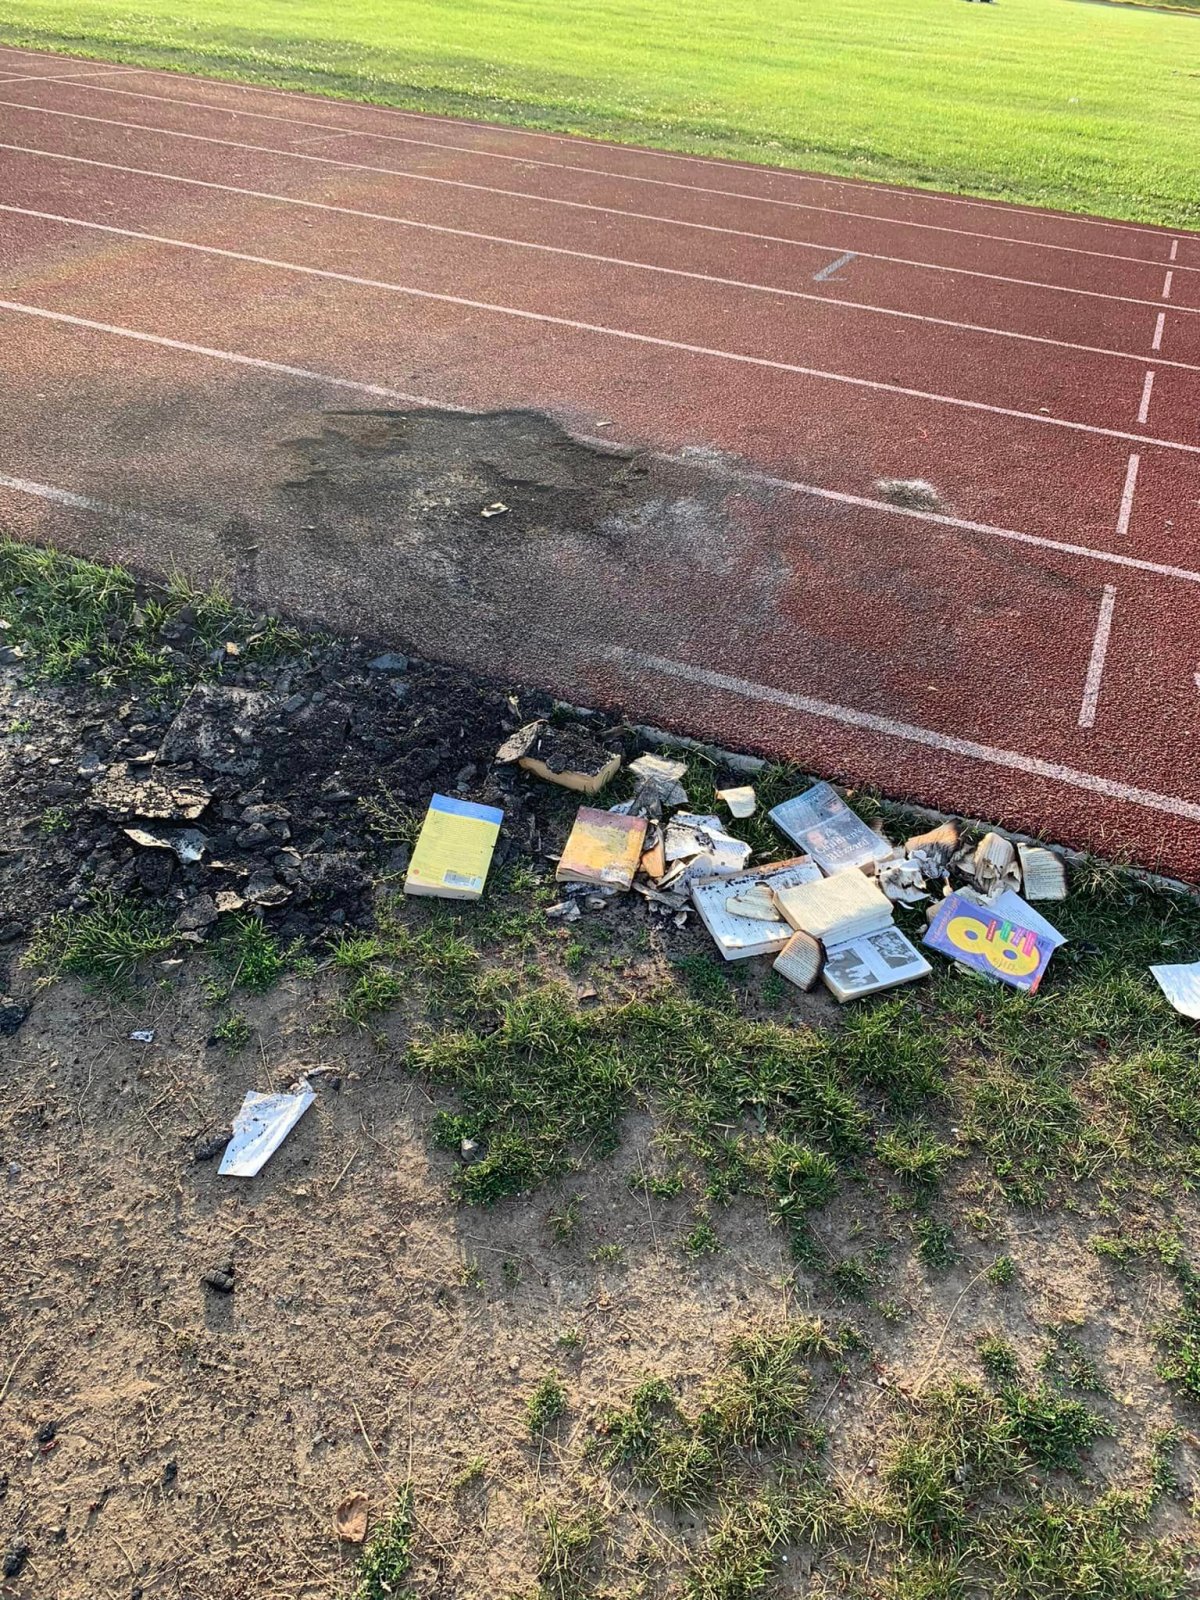 OPP say they have arrested three teens between the ages of 13 and 17, and charged them with arson in relation to several suspicious fires in Napanee, including one at new running track behind a high school.